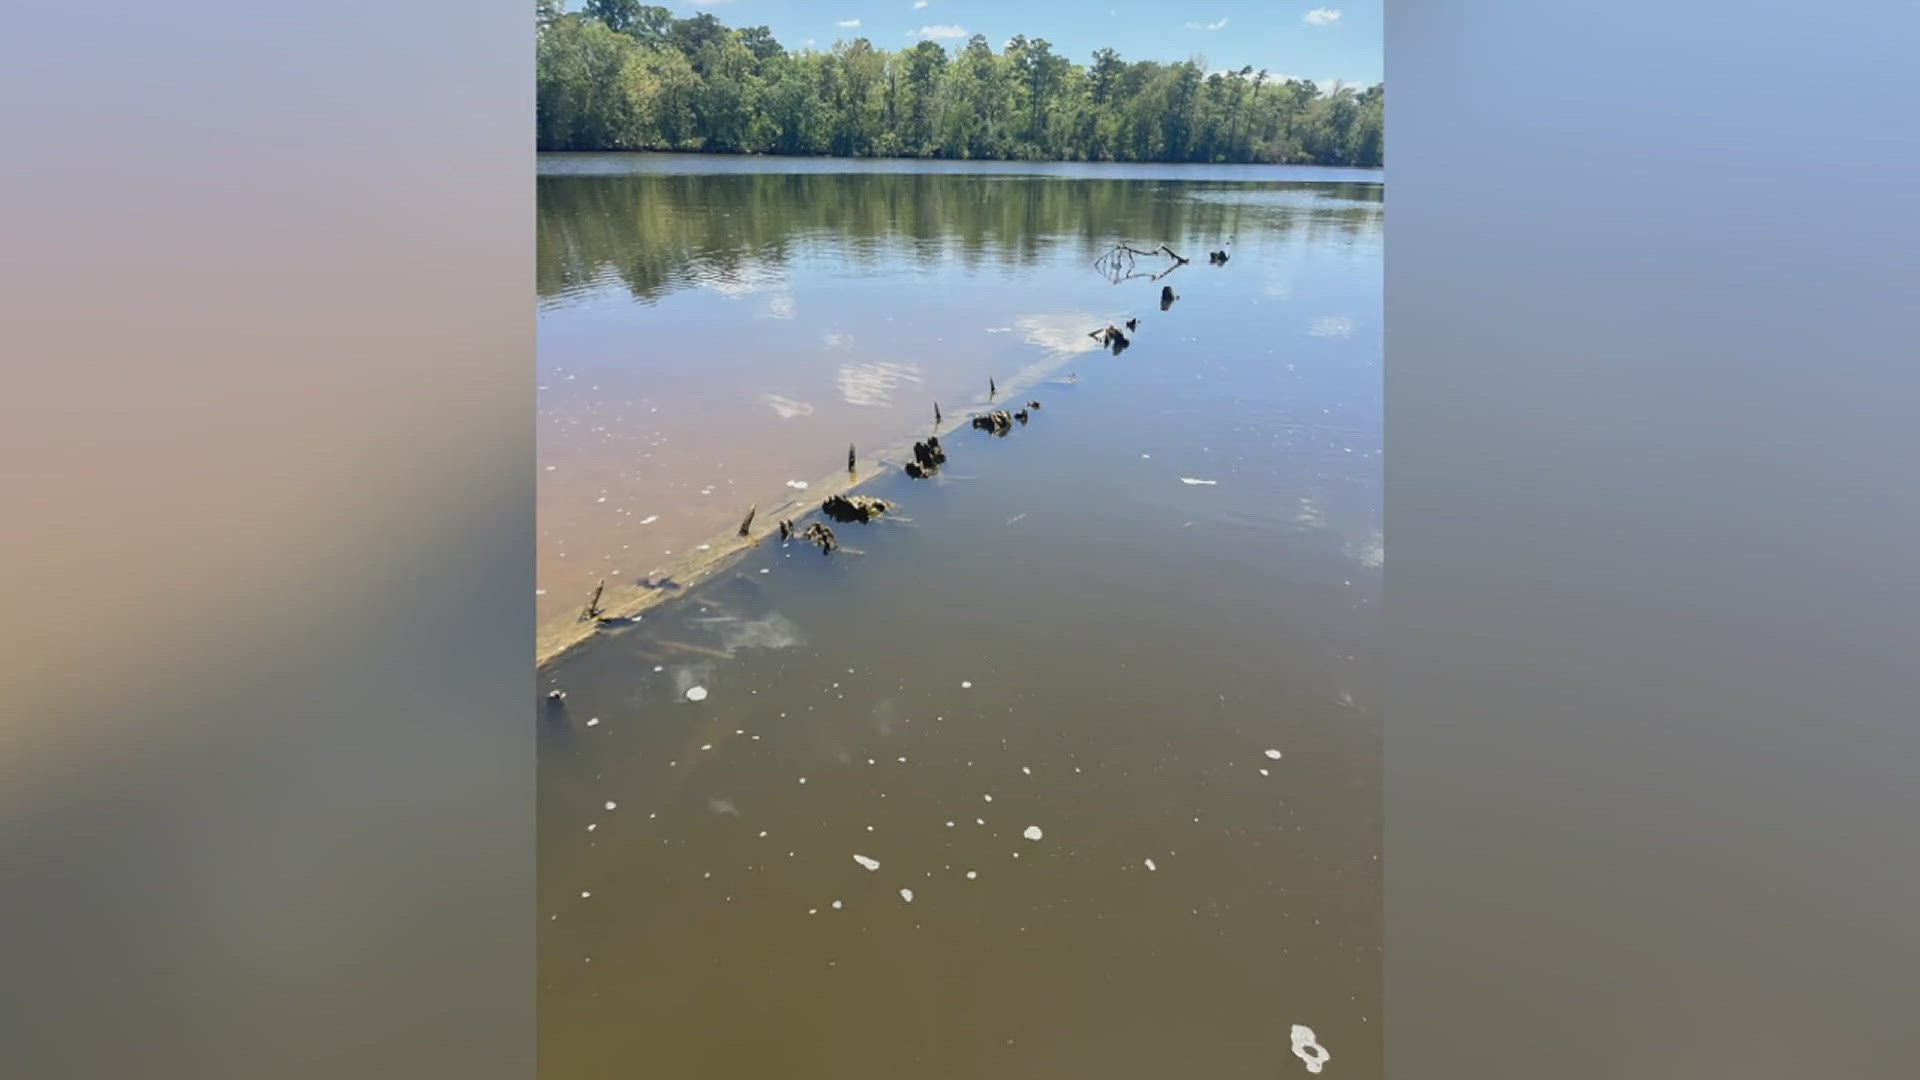 Bill Milner, who grew up on the Neches River, made the discovery last week near Evadale and immediately knew he needed a second set of eyes on the finding.